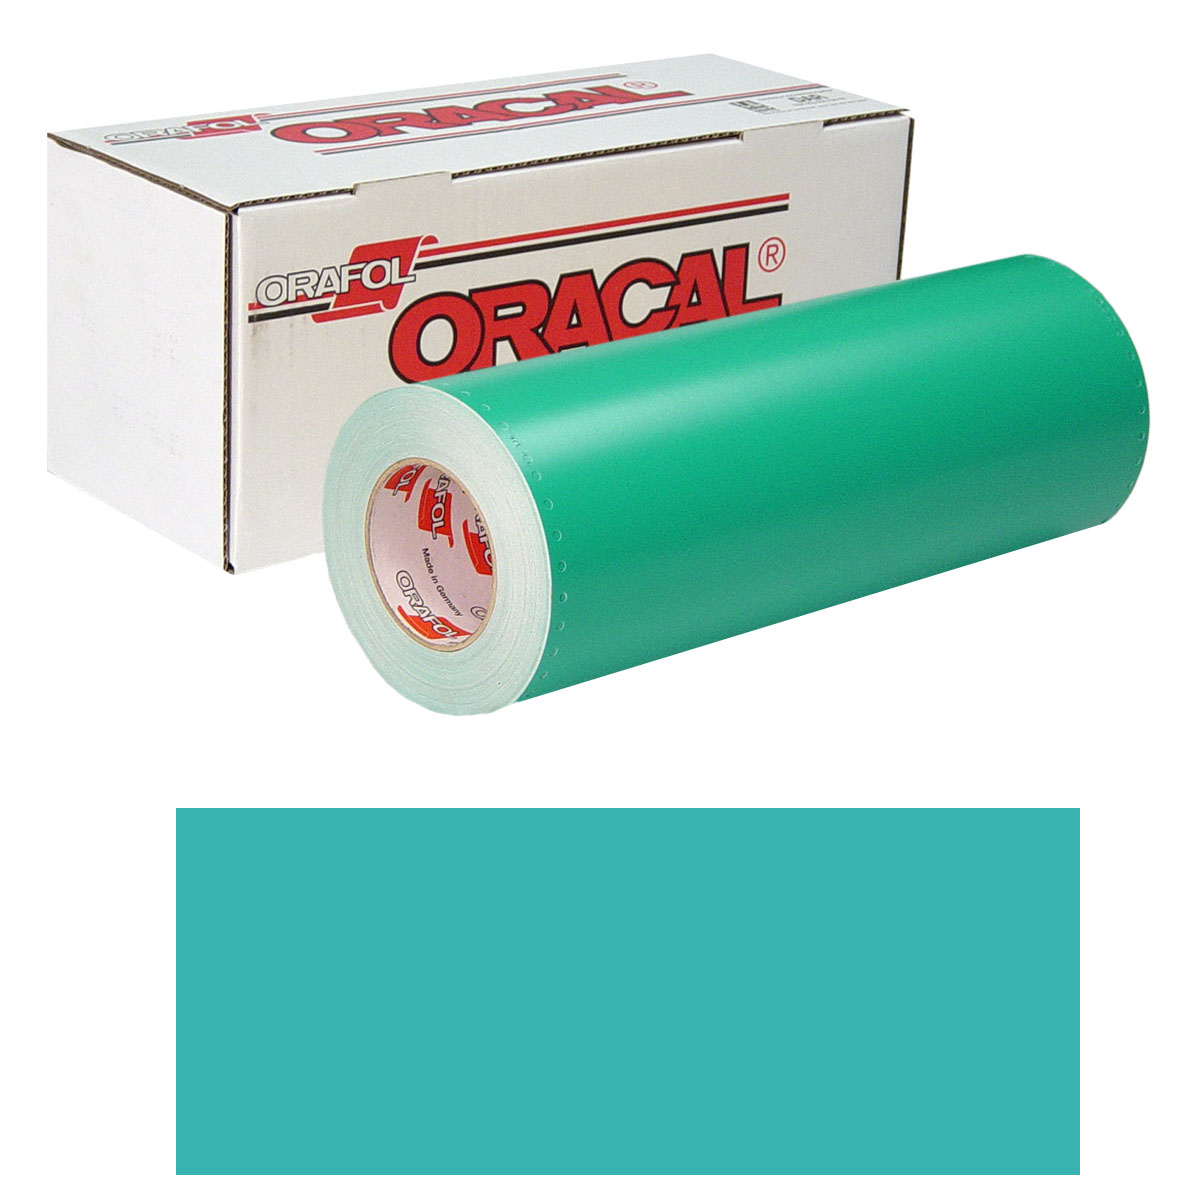 ORACAL 8500 30in X 50yd 054 Turquoise